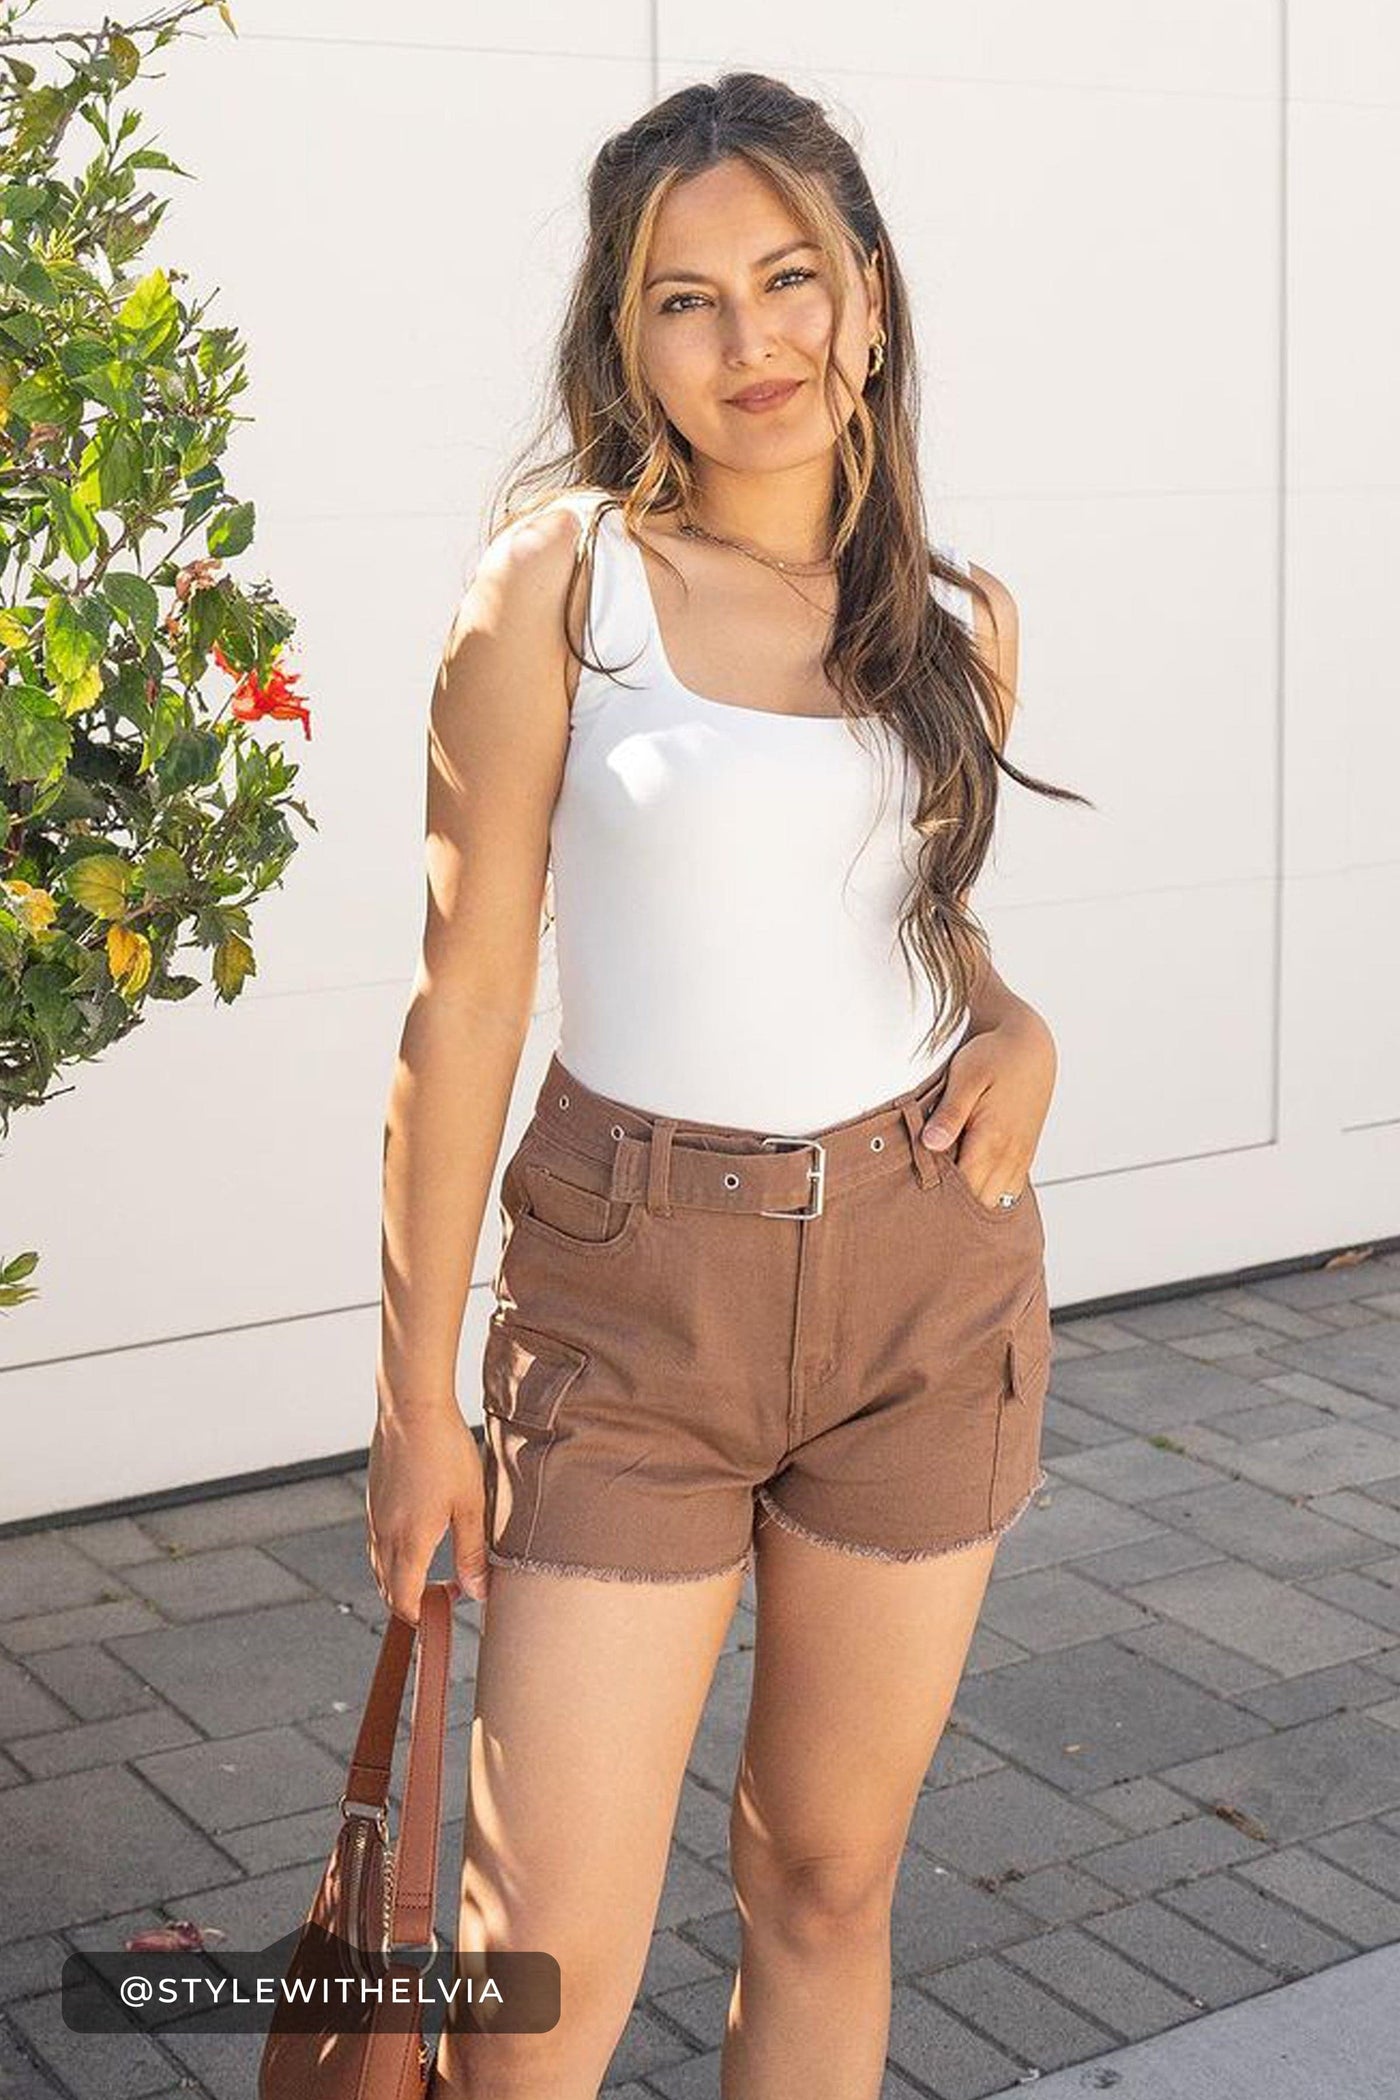 Women’s High Rise Belted Cargo Shorts